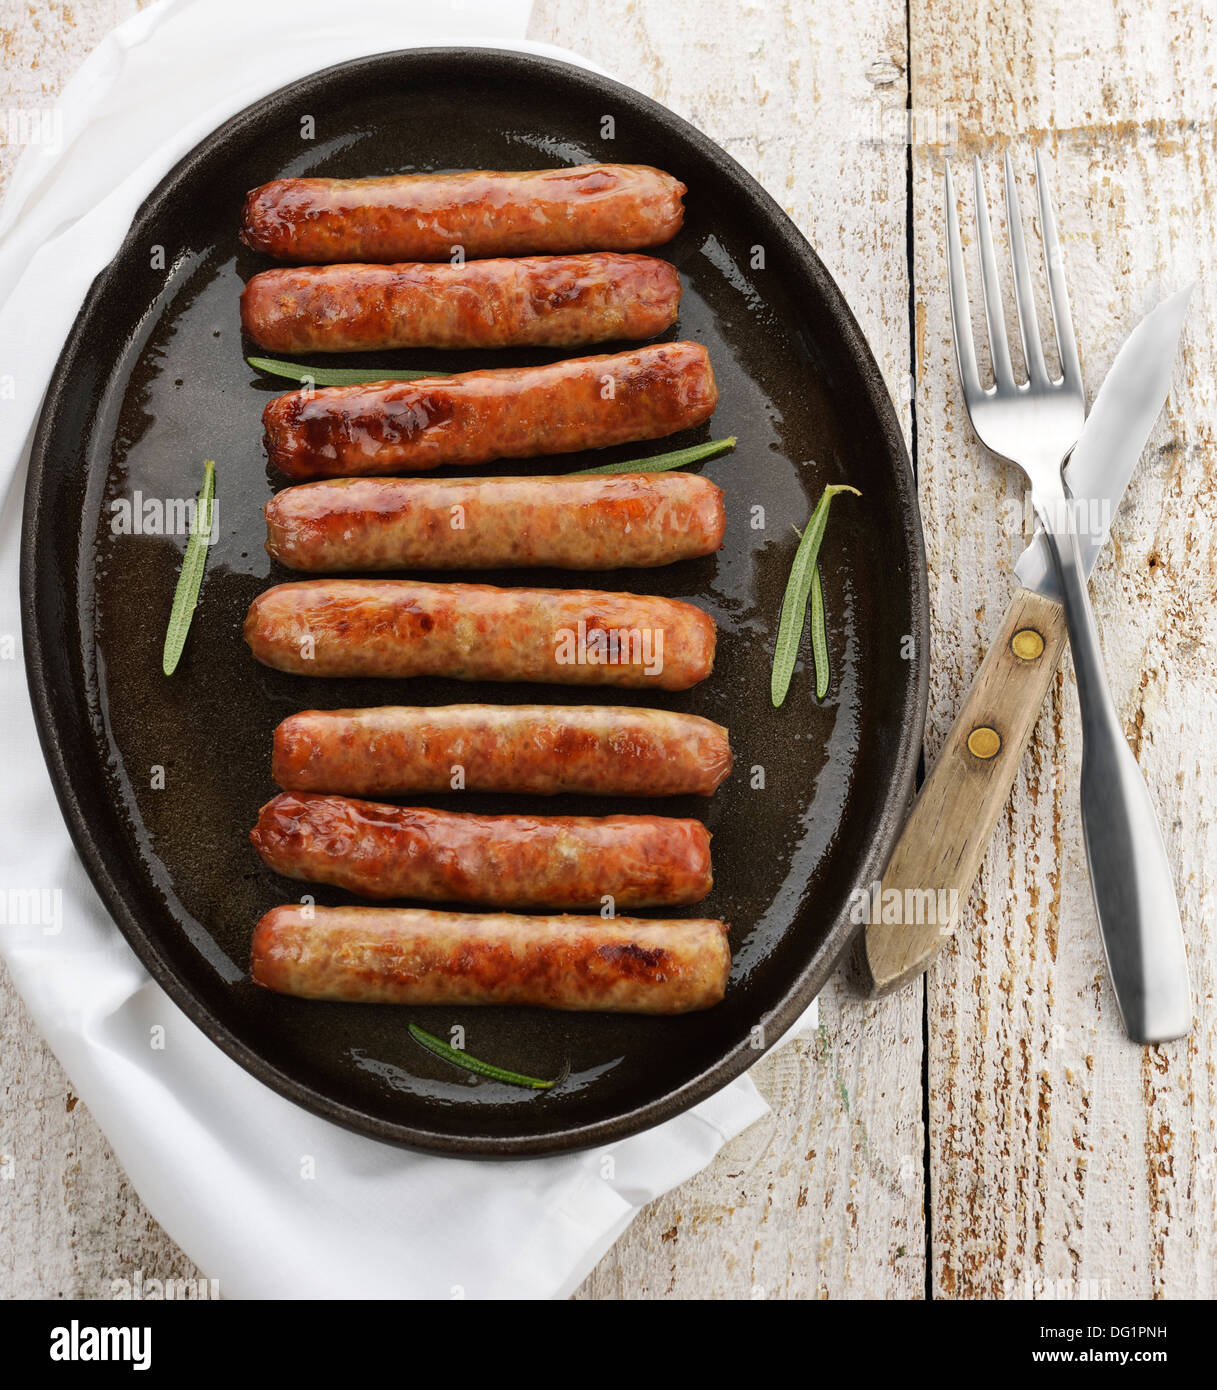 Fried Breakfast Sausage Links On A Pan Stock Photo